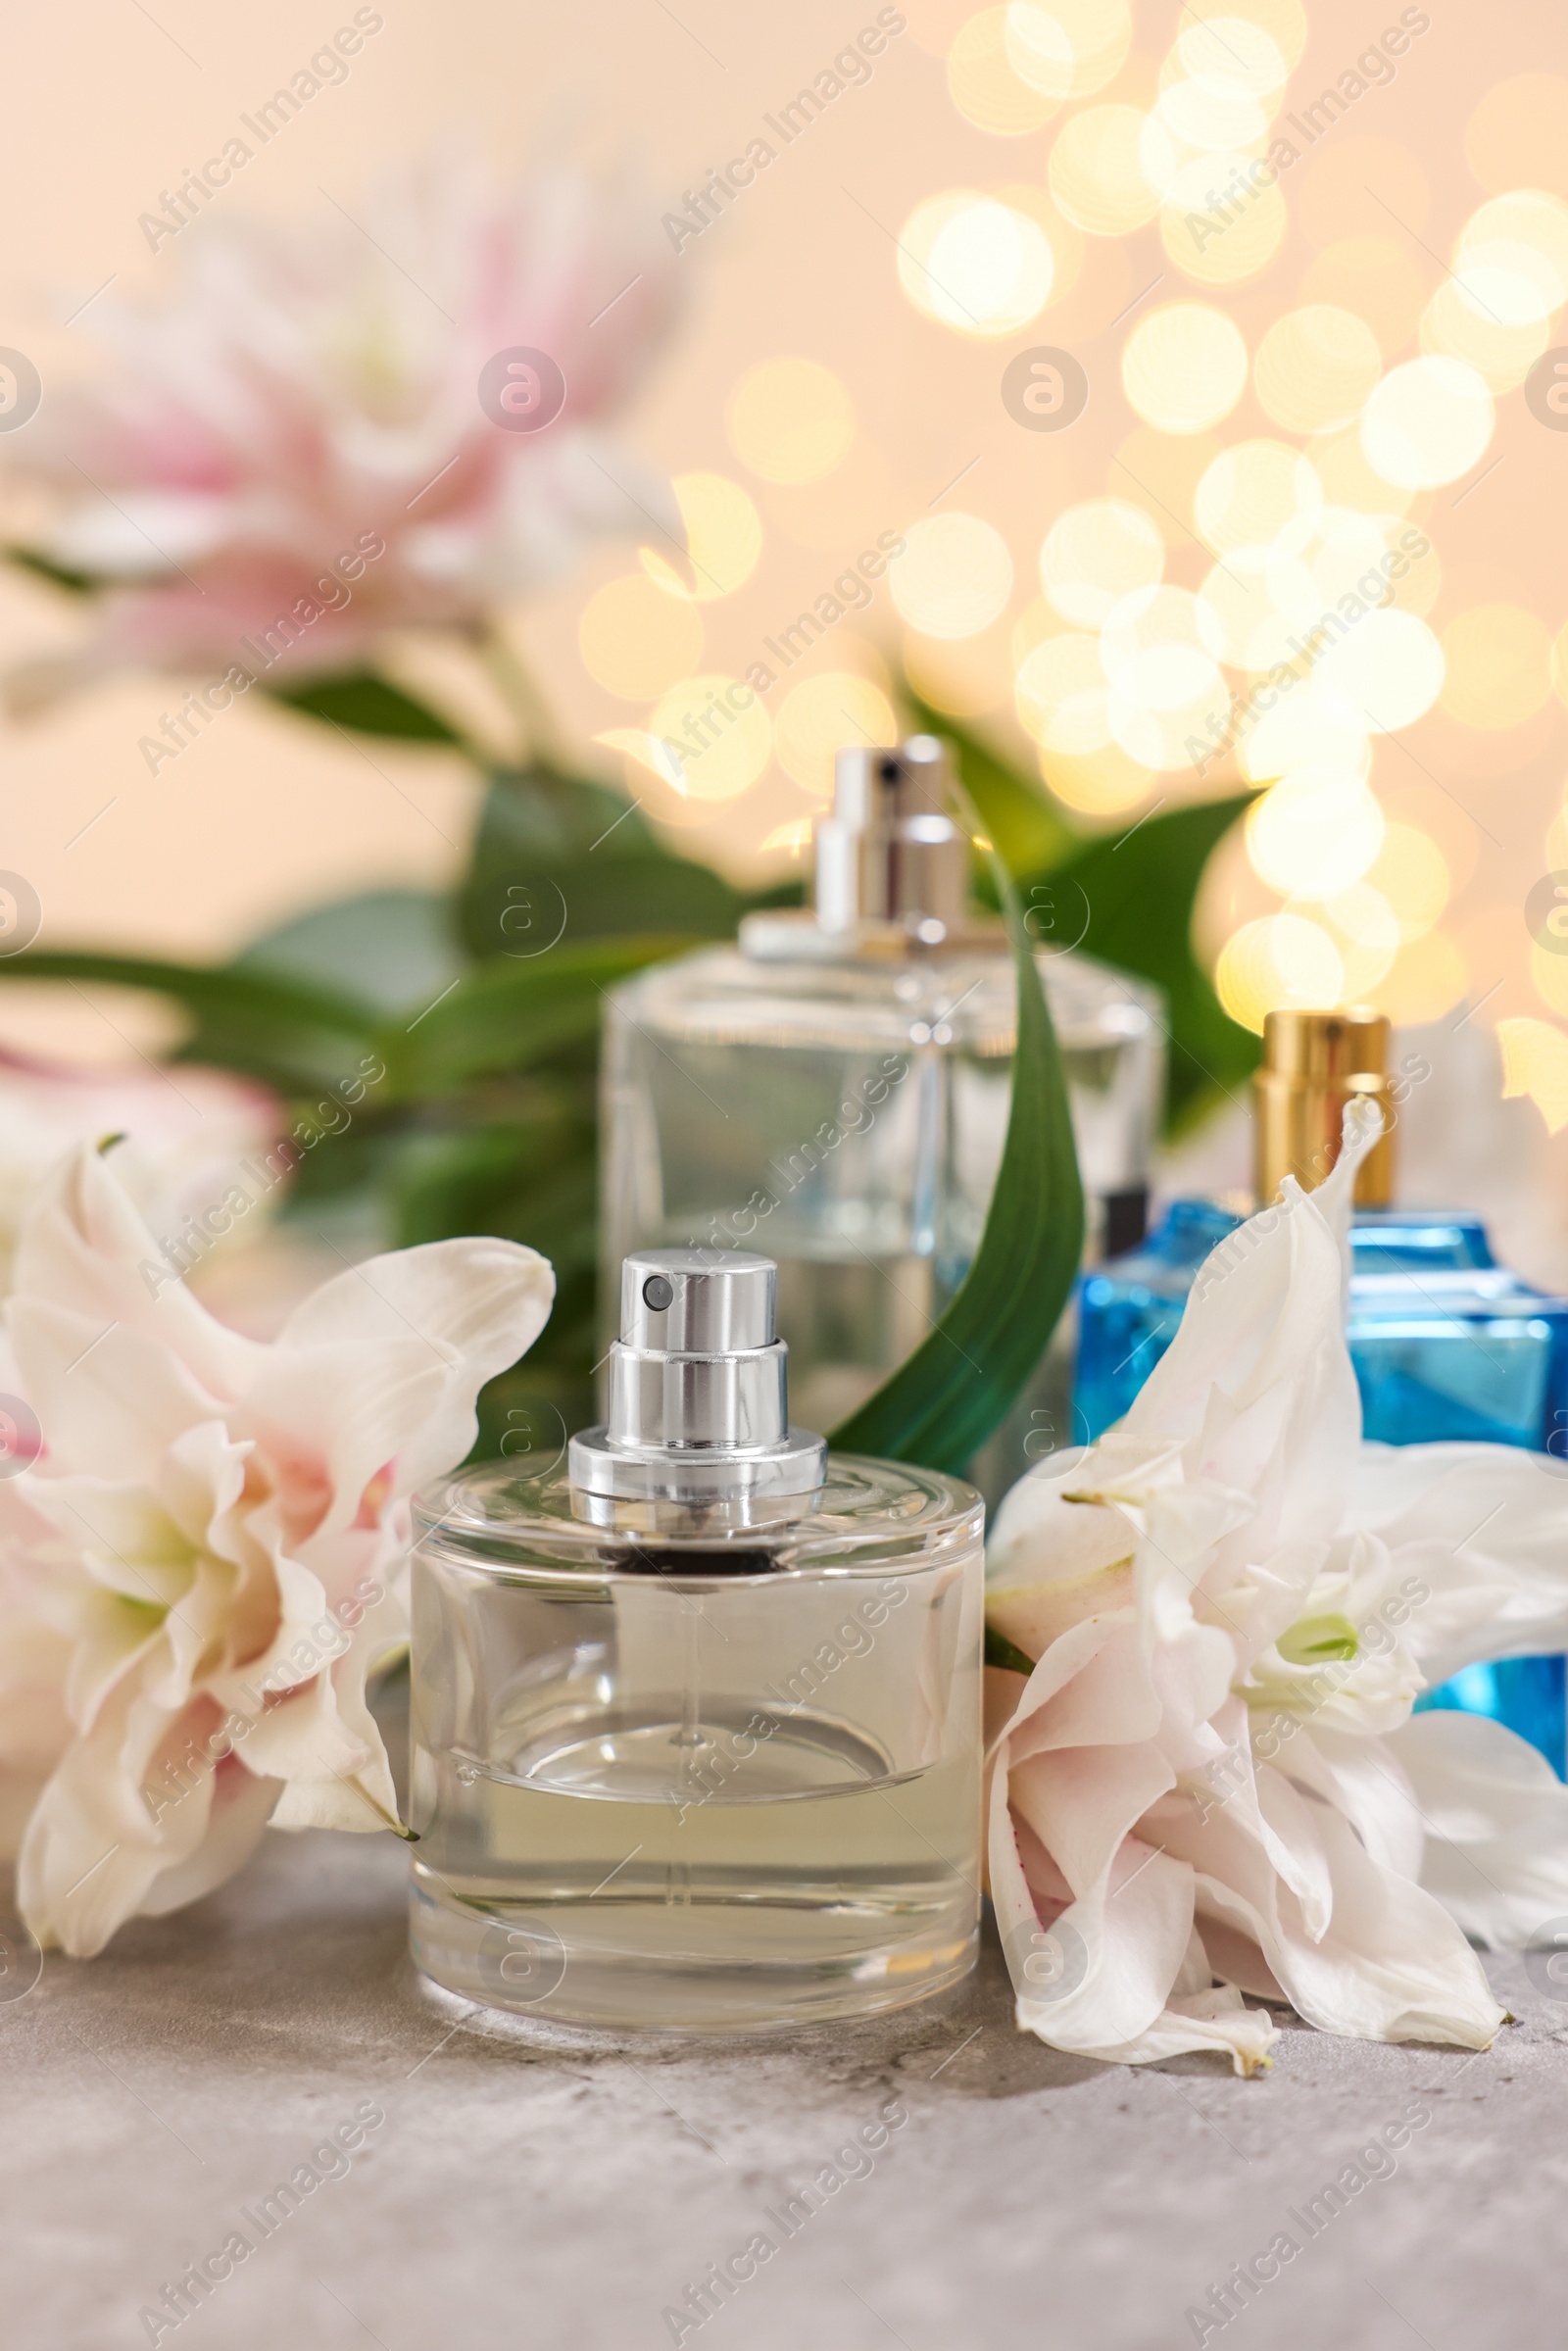 Photo of Bottlesperfume and beautiful lily flowers on table against beige background with blurred lights, closeup